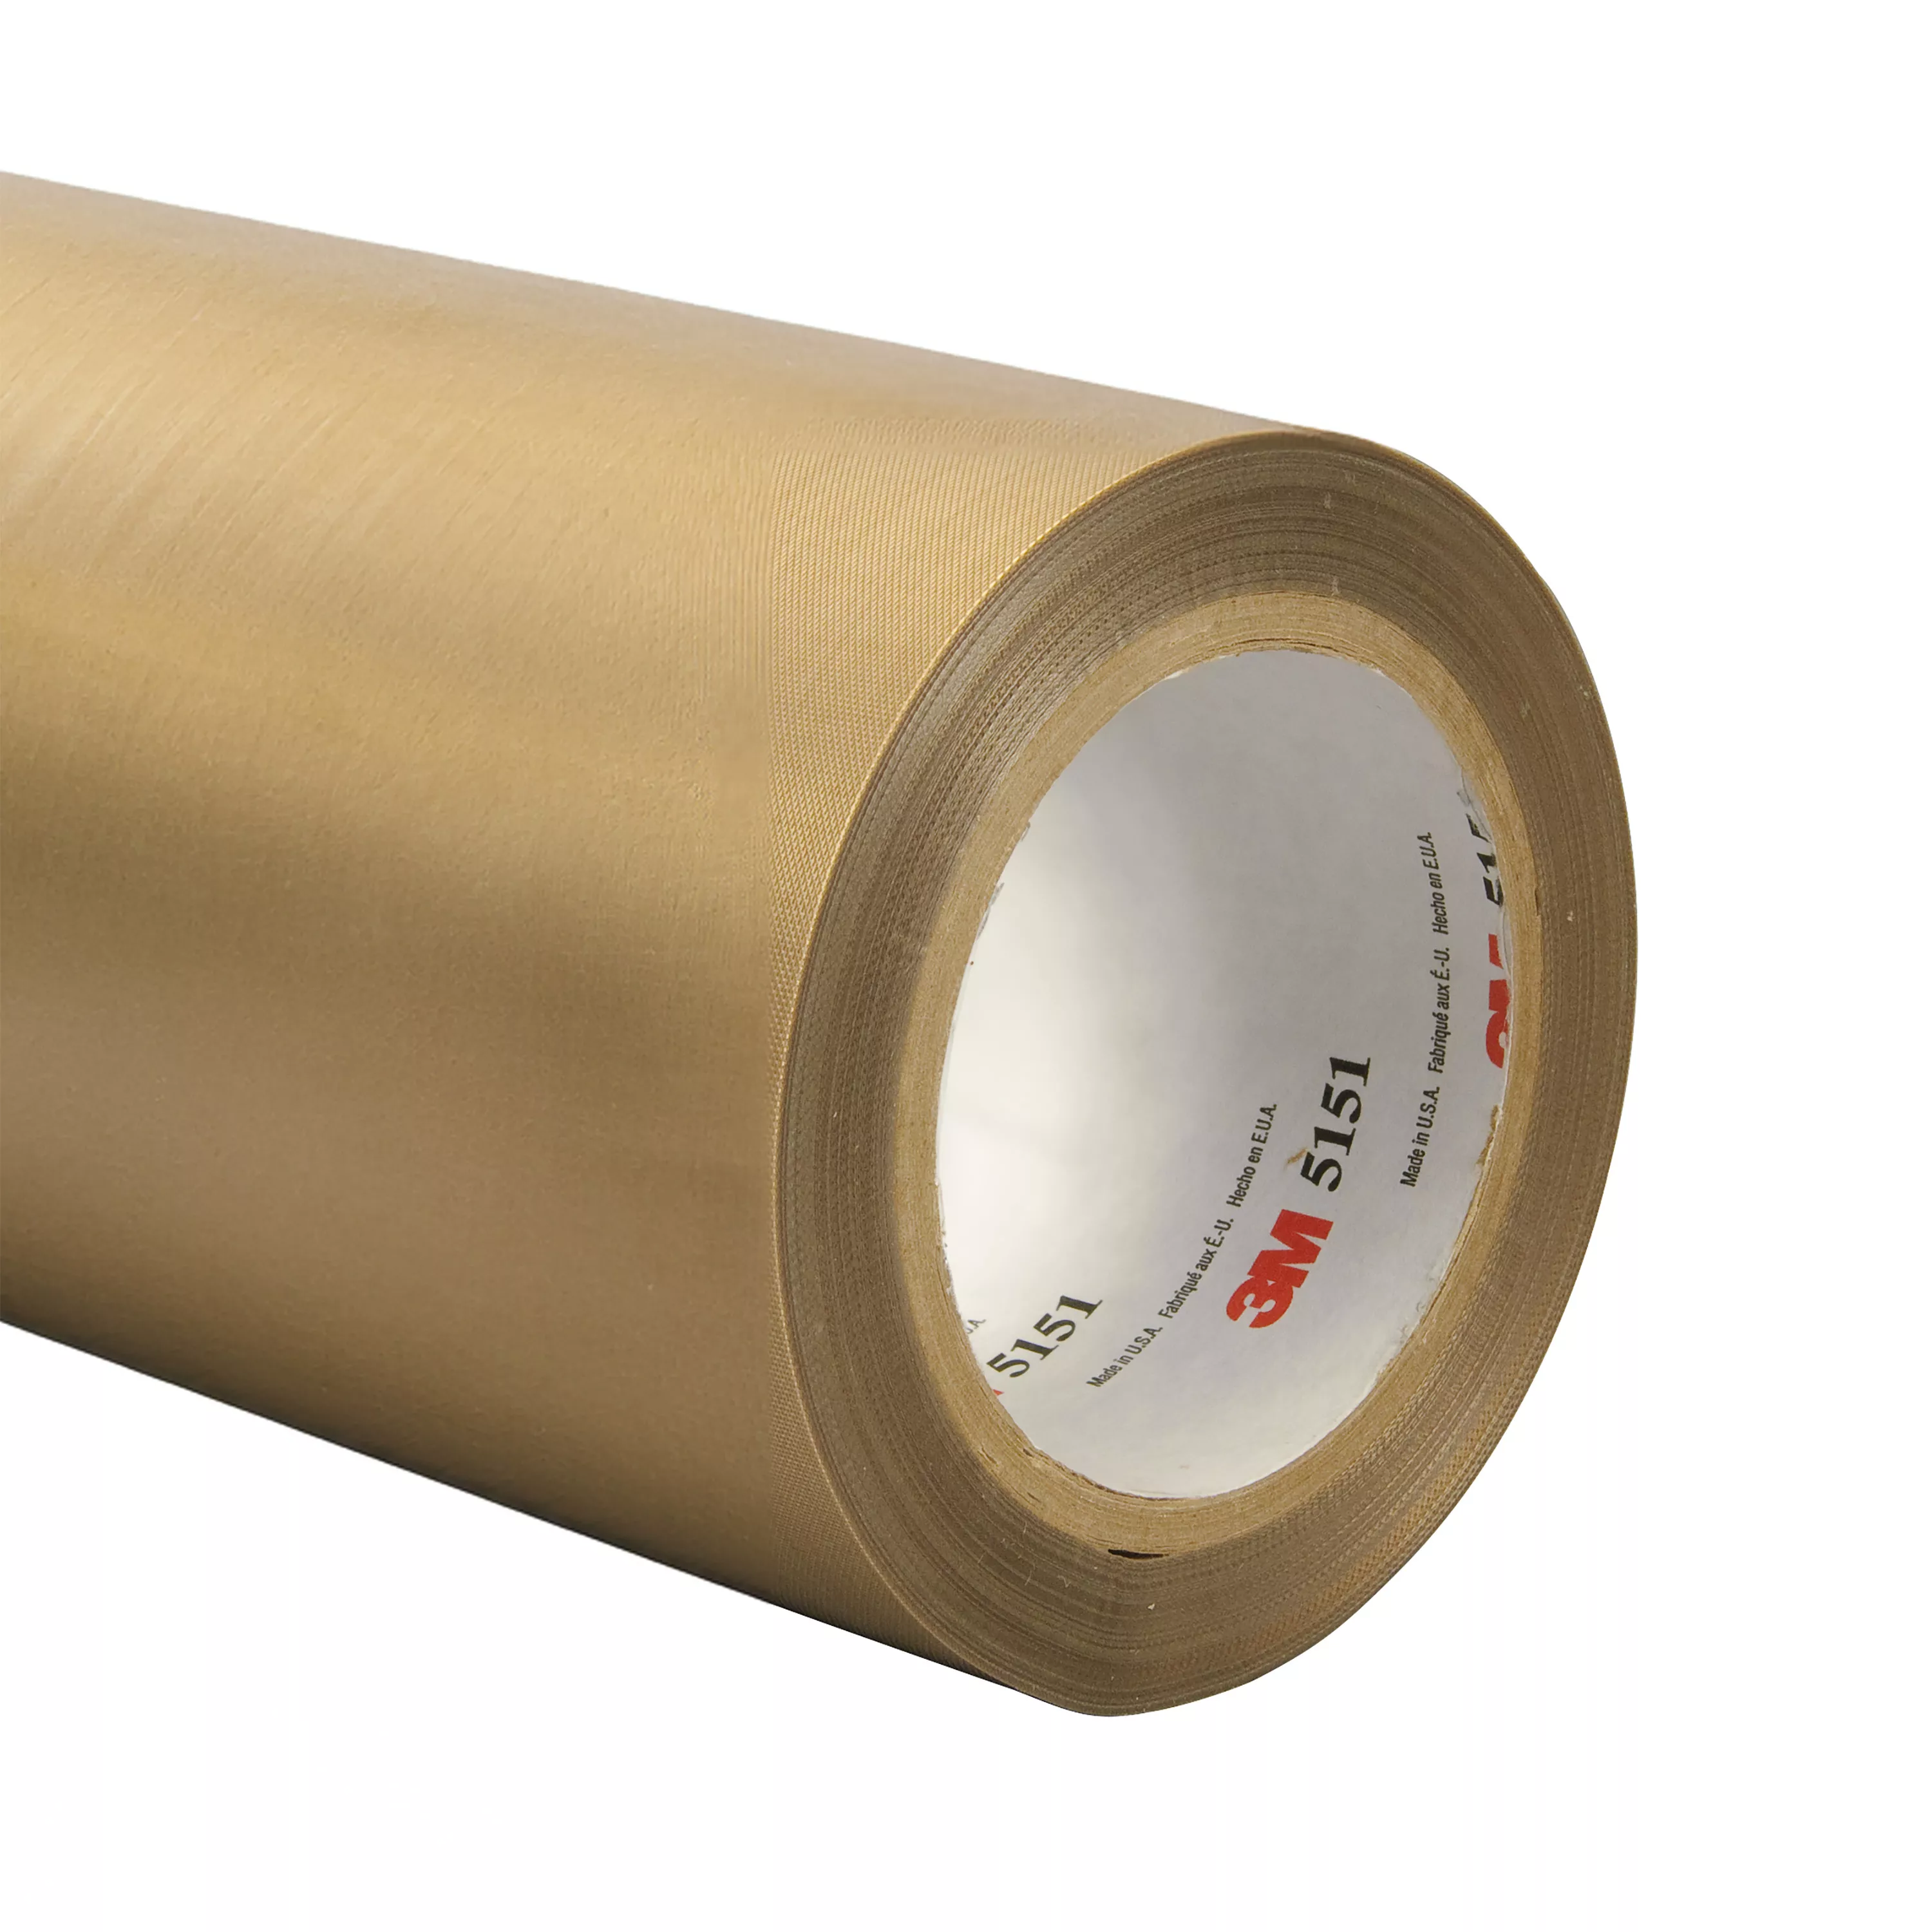 3M™ General Purpose PTFE Glass Cloth Tape 5151PL, Light Brown, 36 in x
36 yd, 5.3 mil, 1 Roll/Case